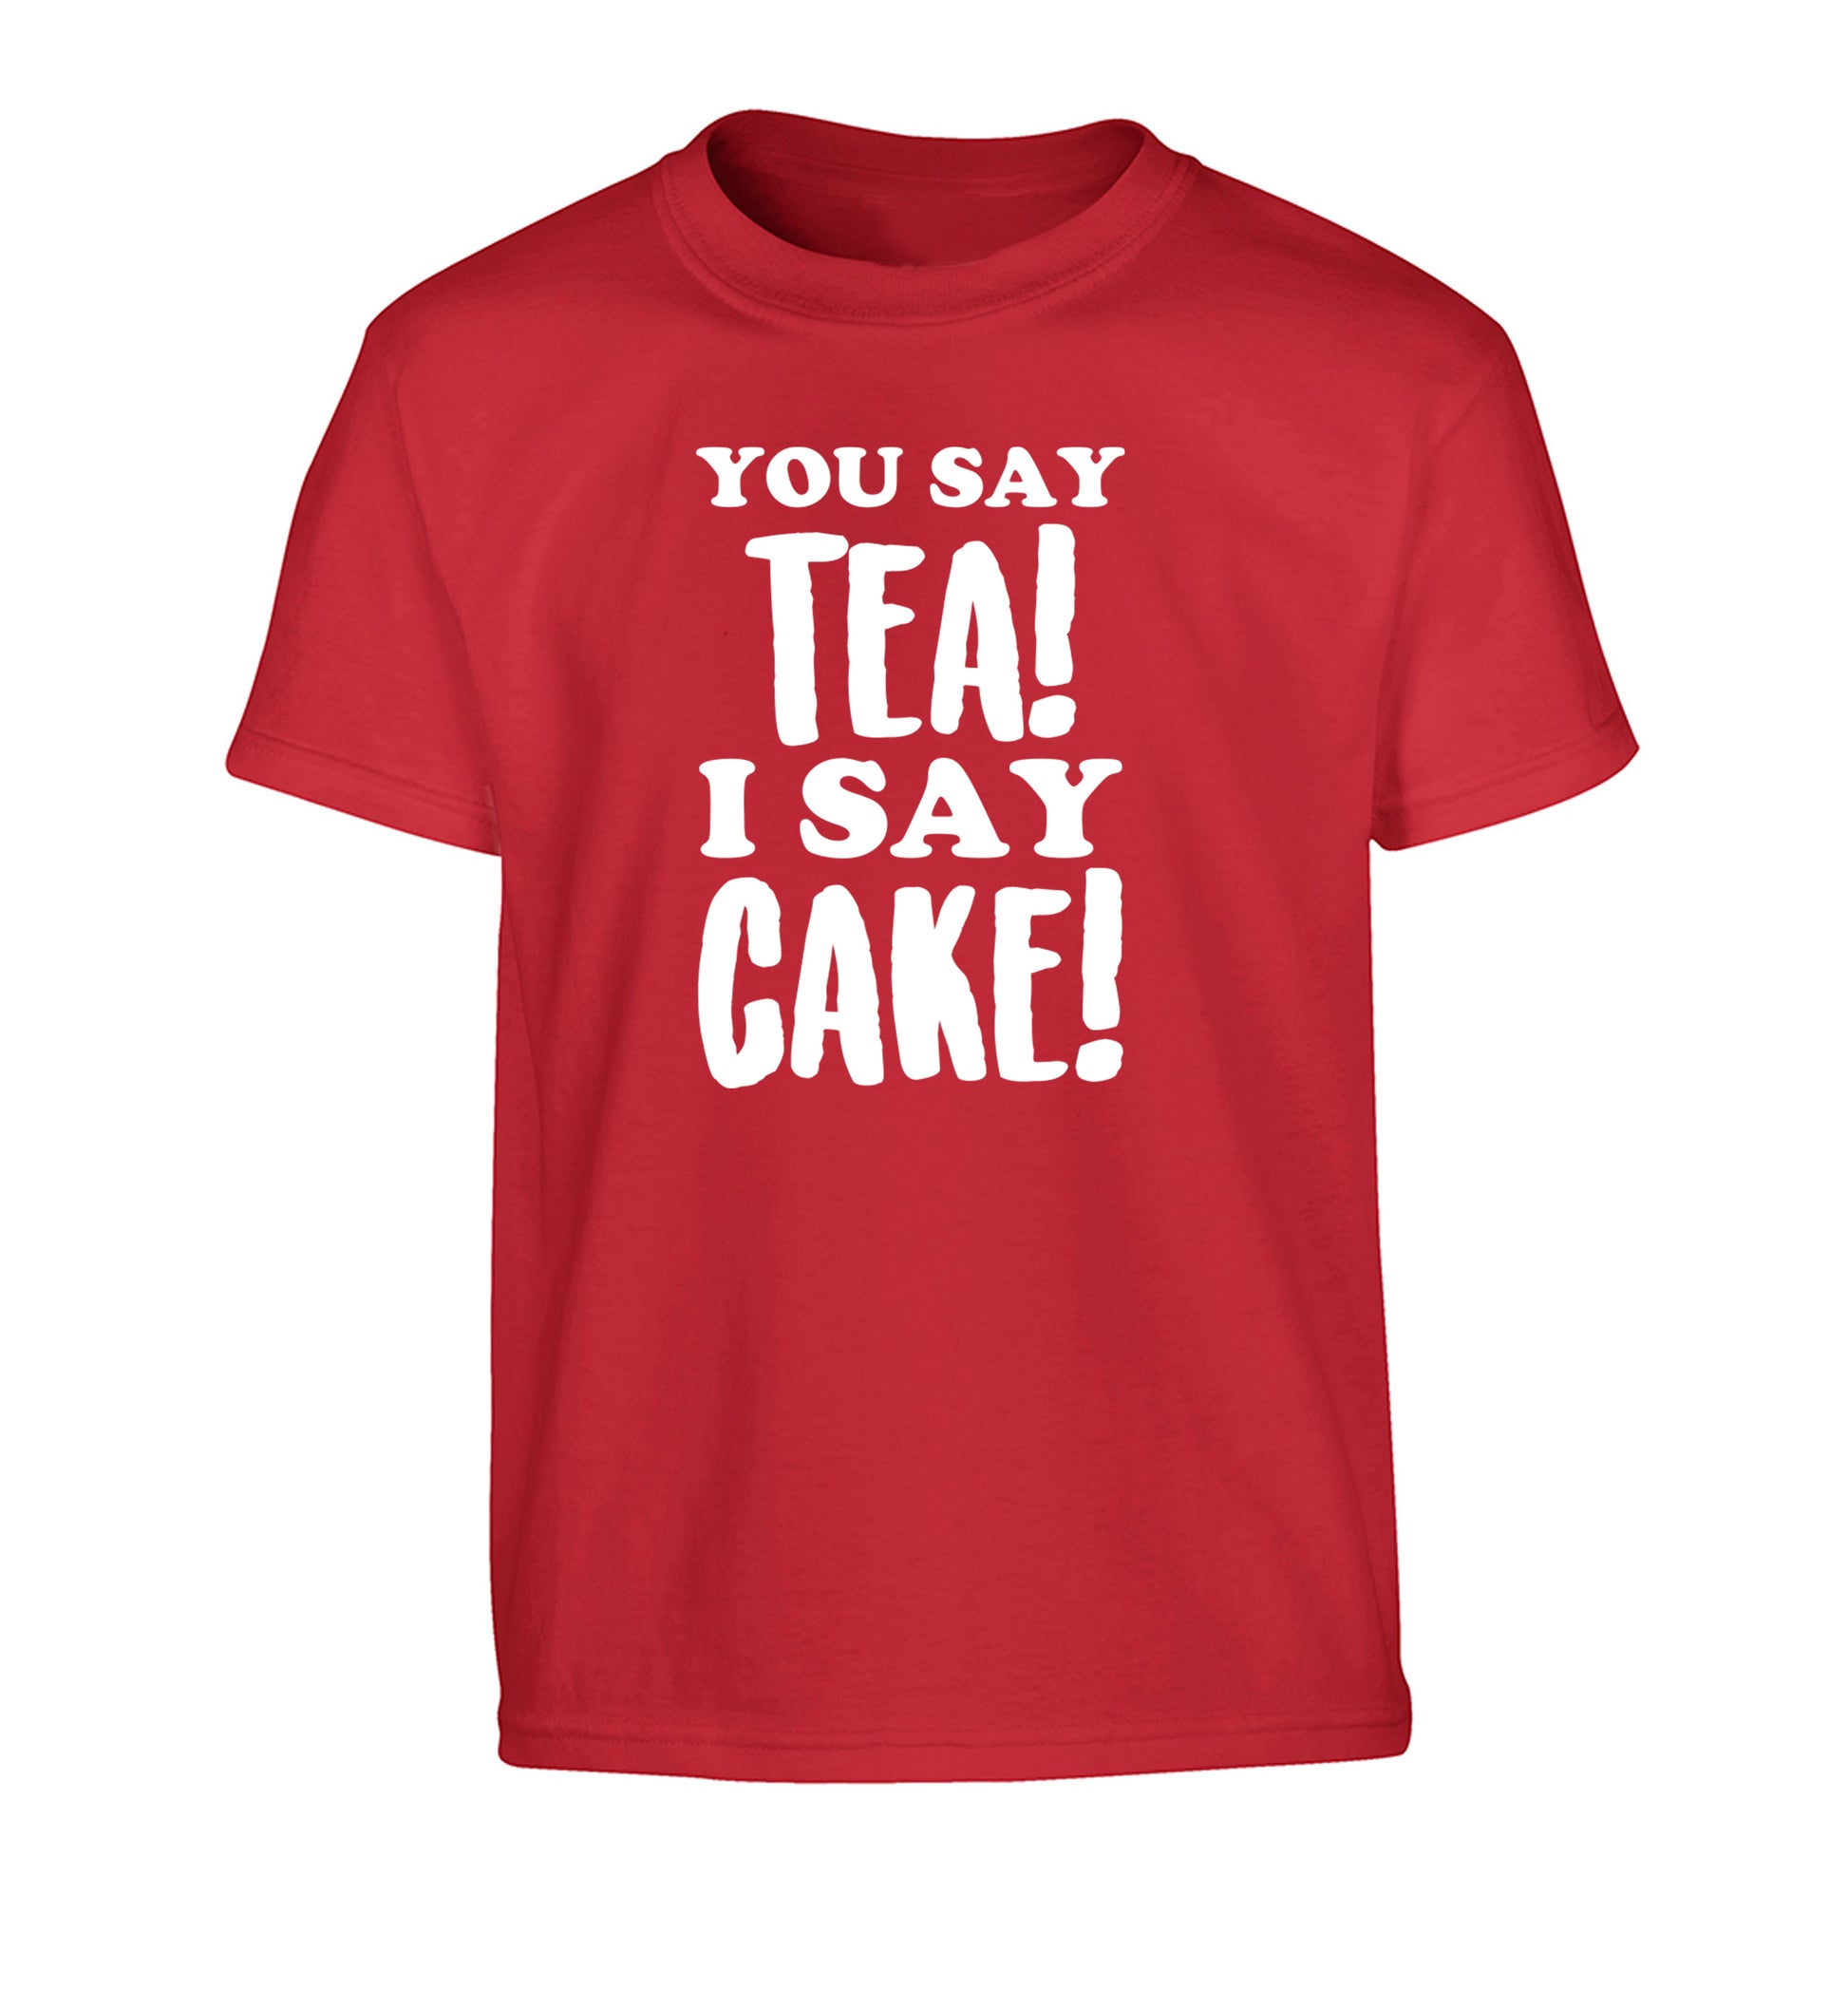 You say tea I say cake! Children's red Tshirt 12-14 Years